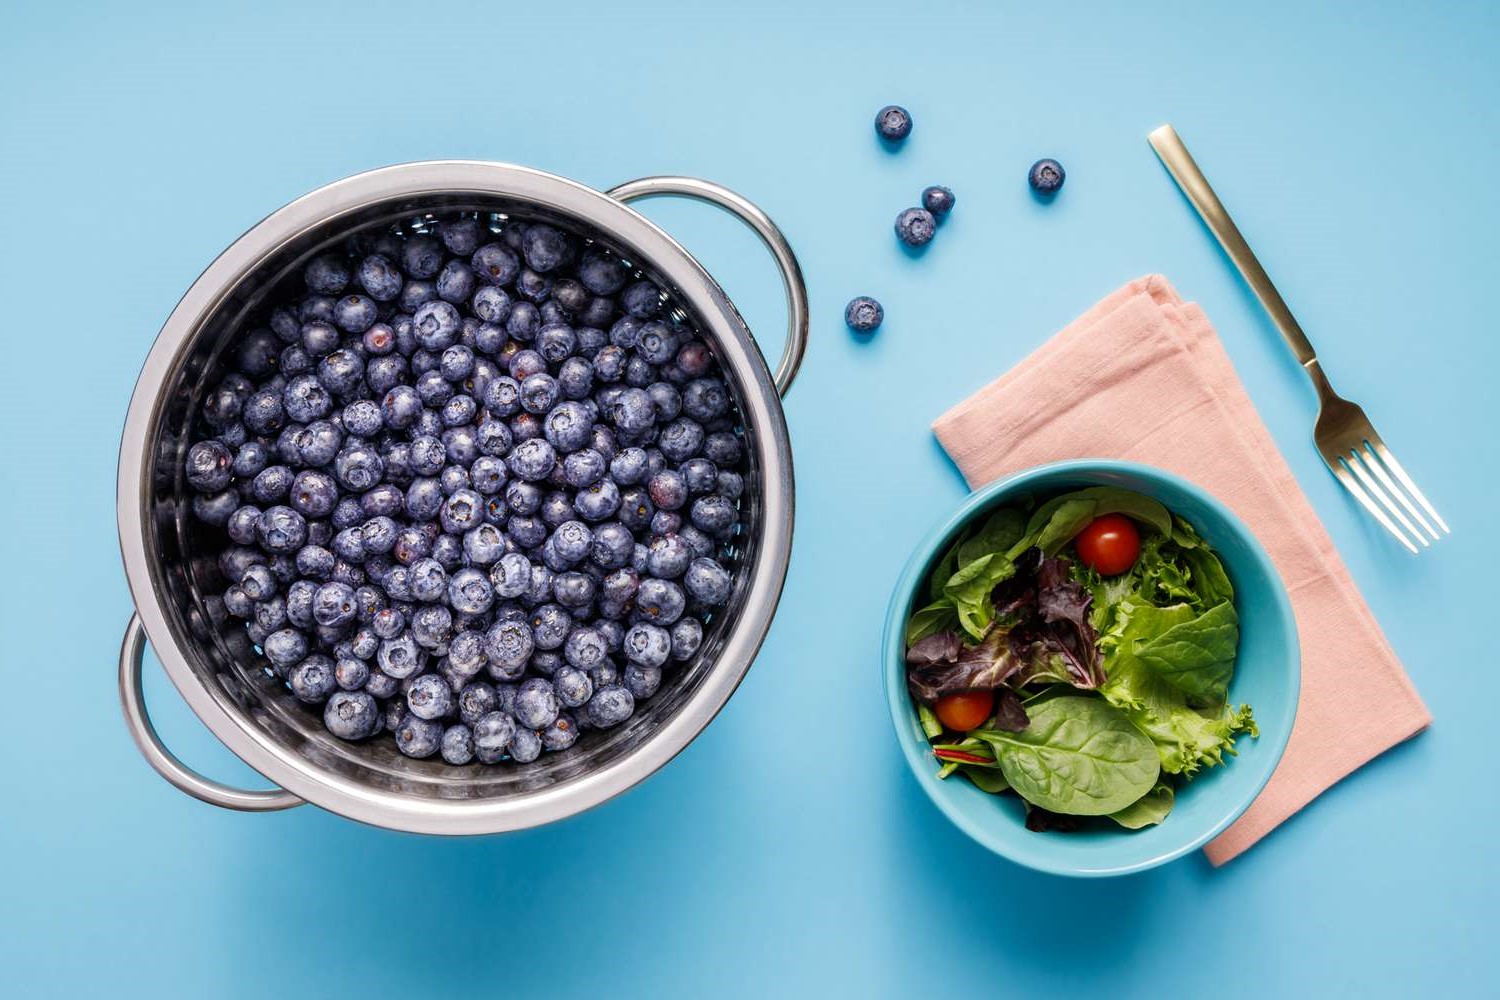 How To Clean Blueberries